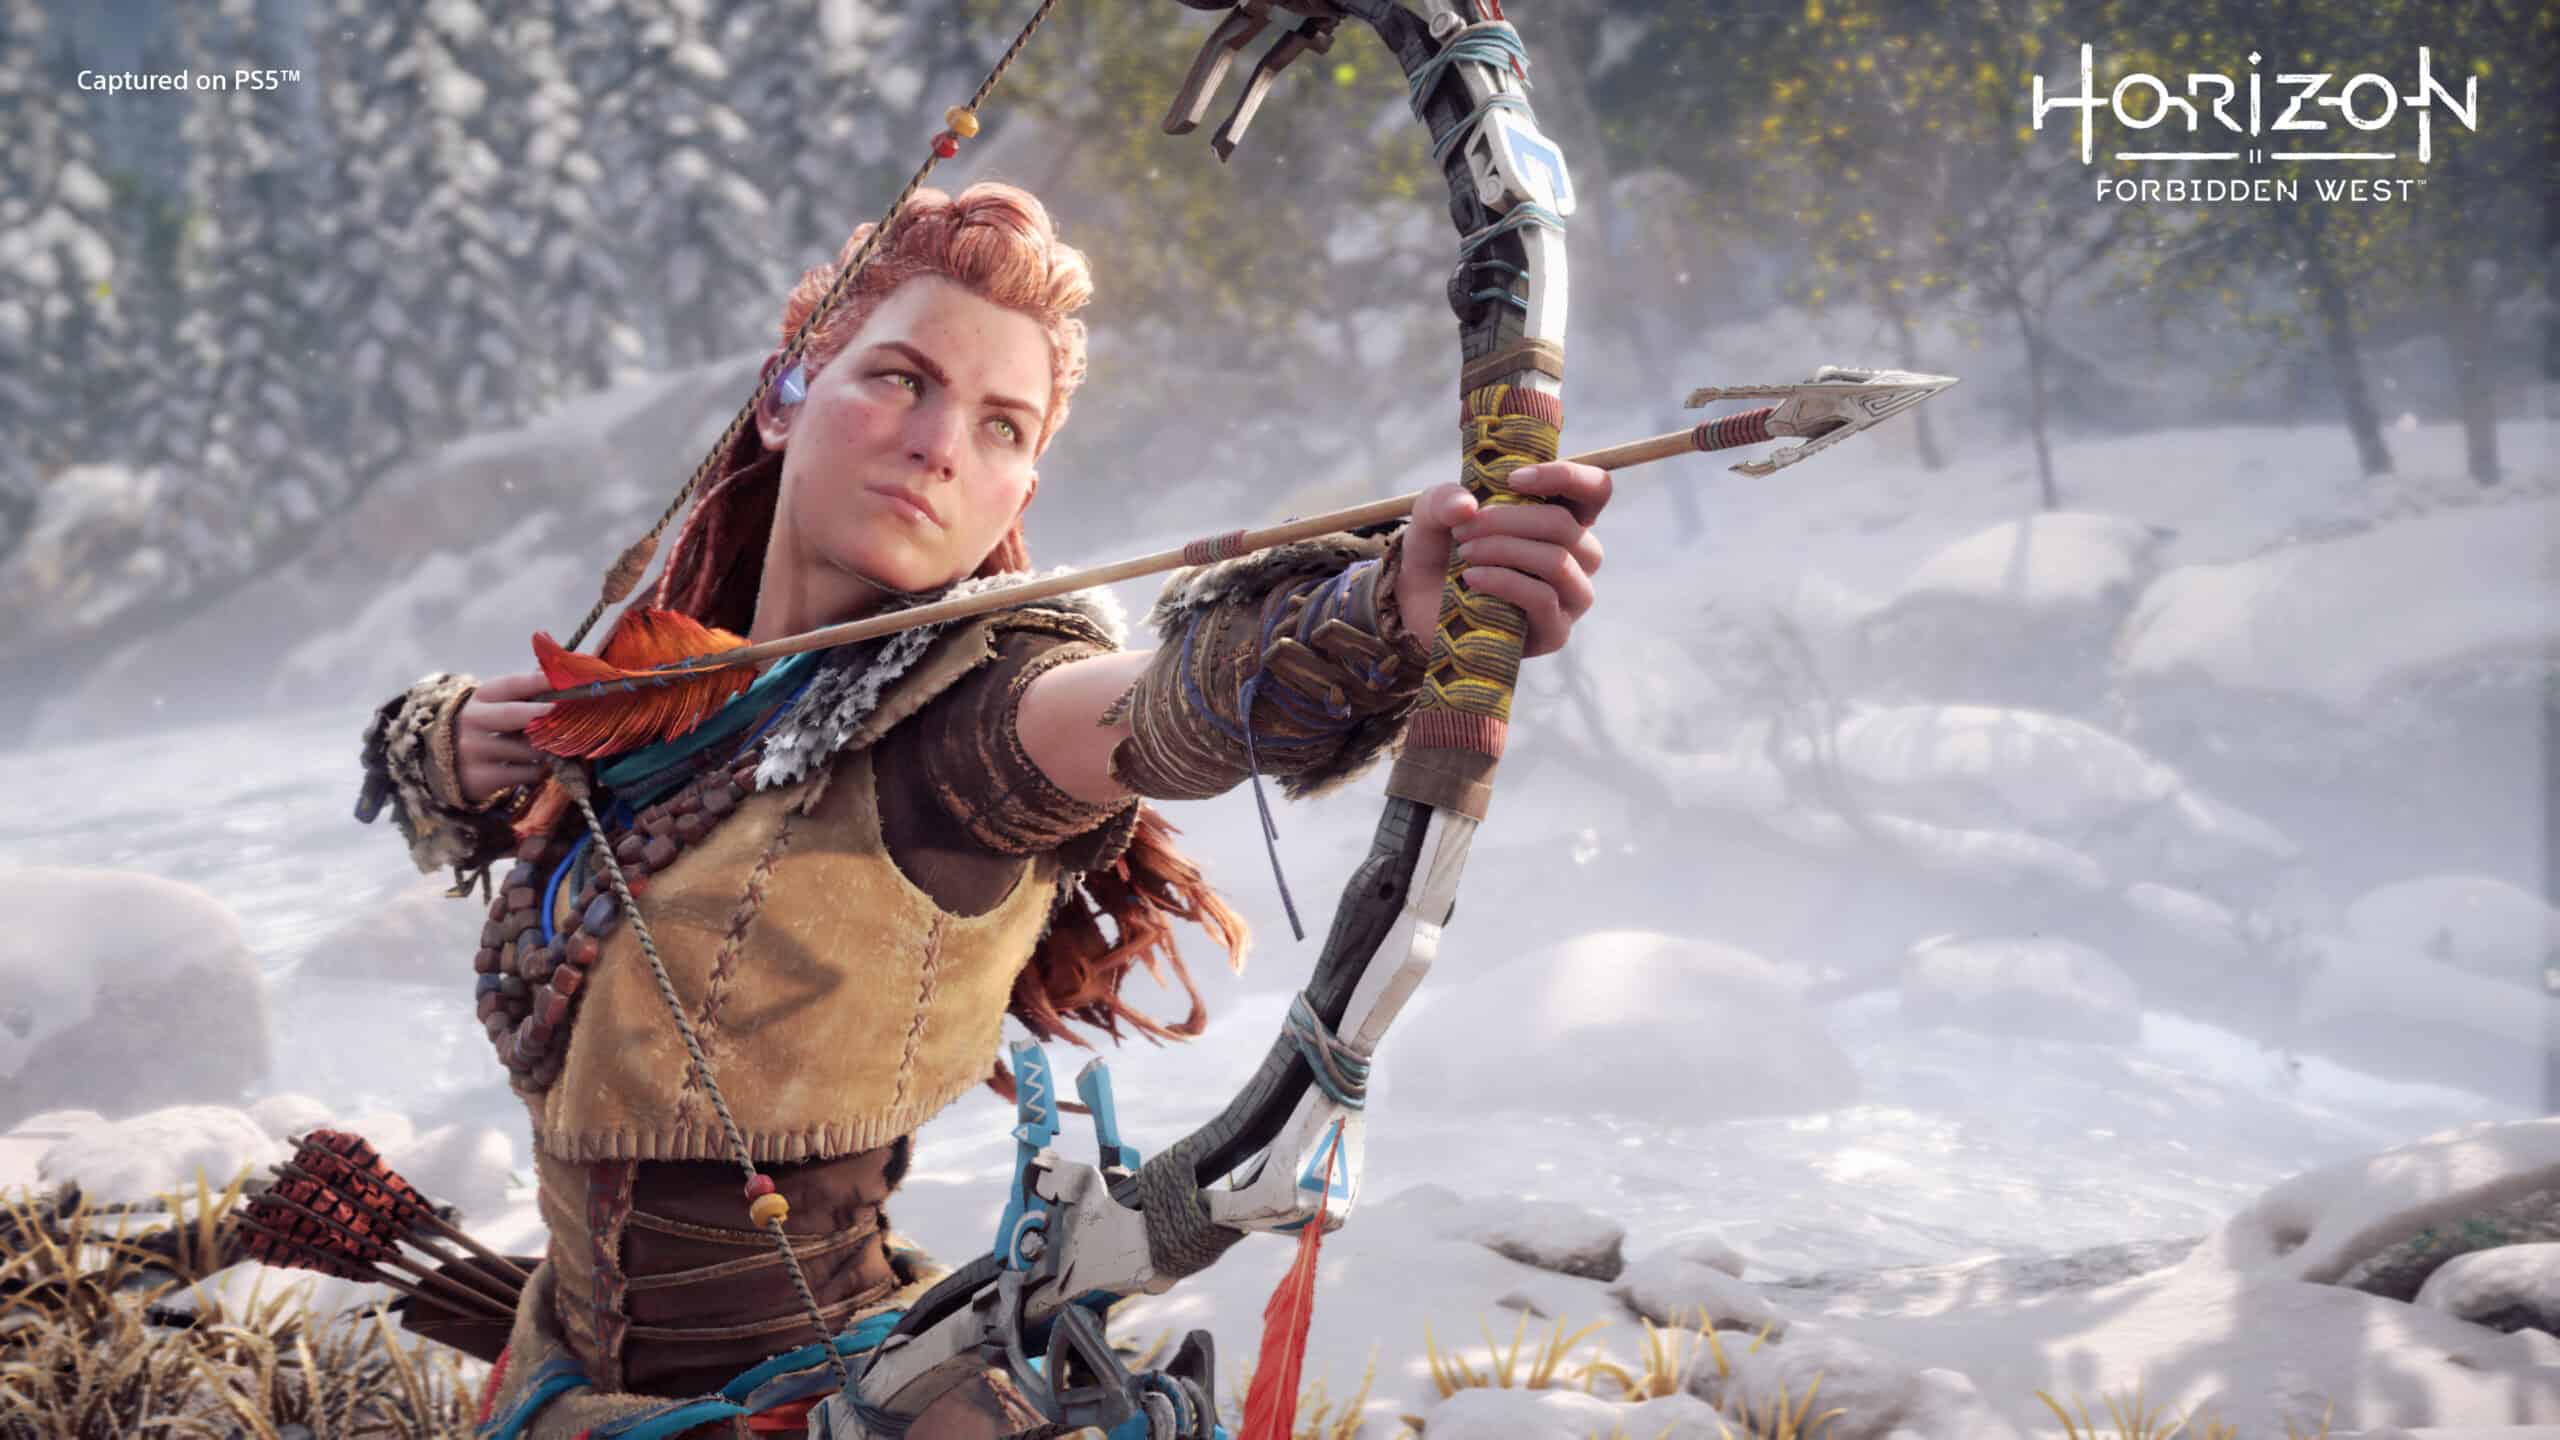 The main protagonist Aloy of Horizon series wielding a bow.